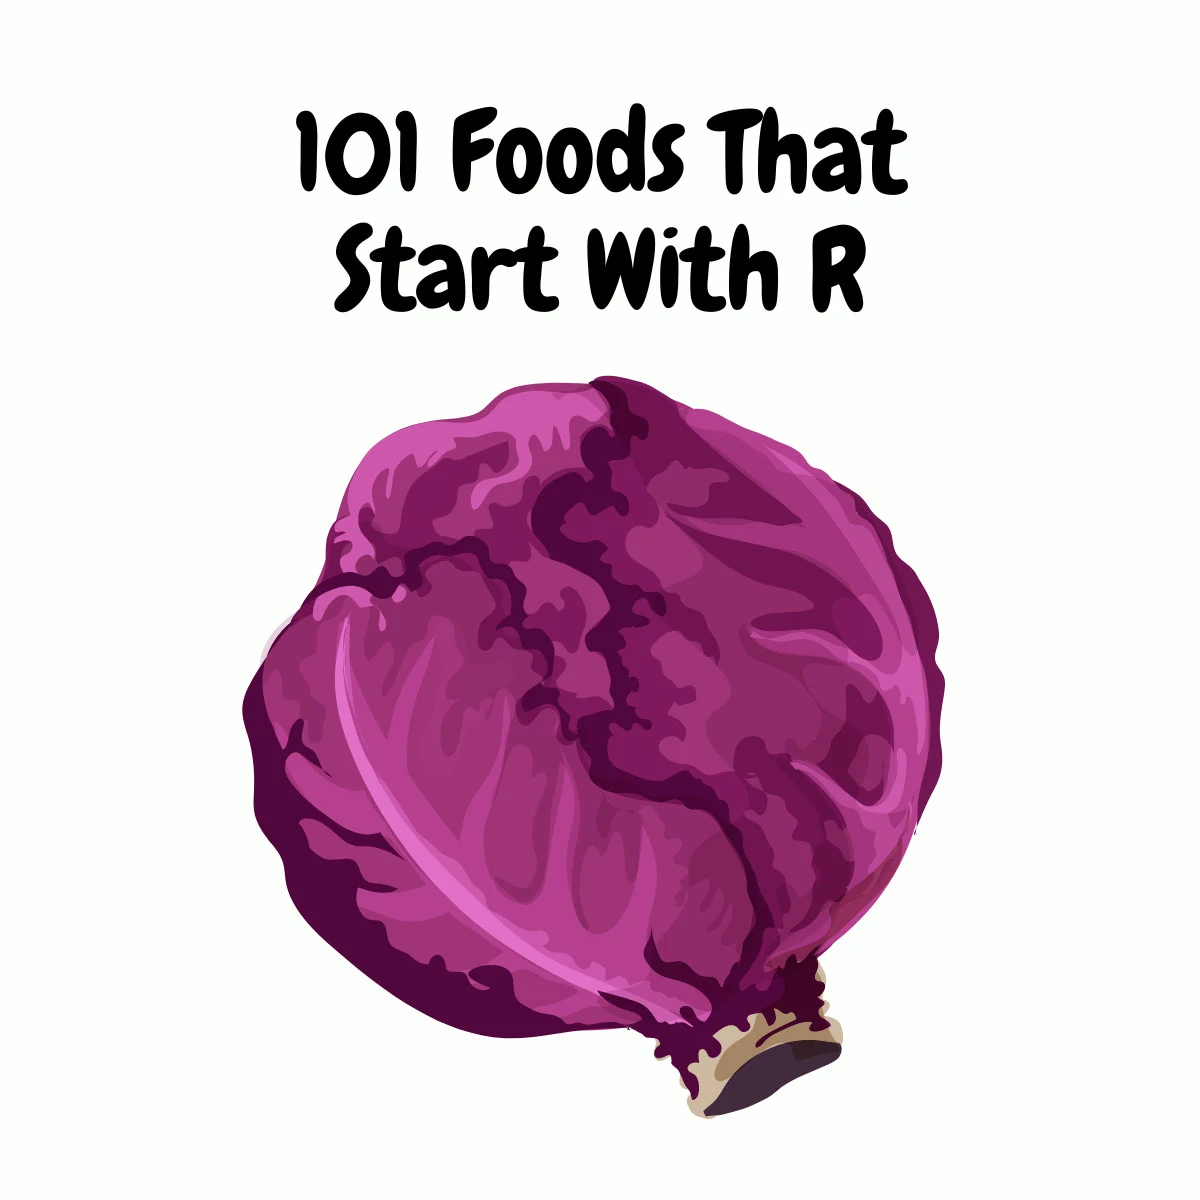 Foods That Start With R featured image | Girl Meets Food